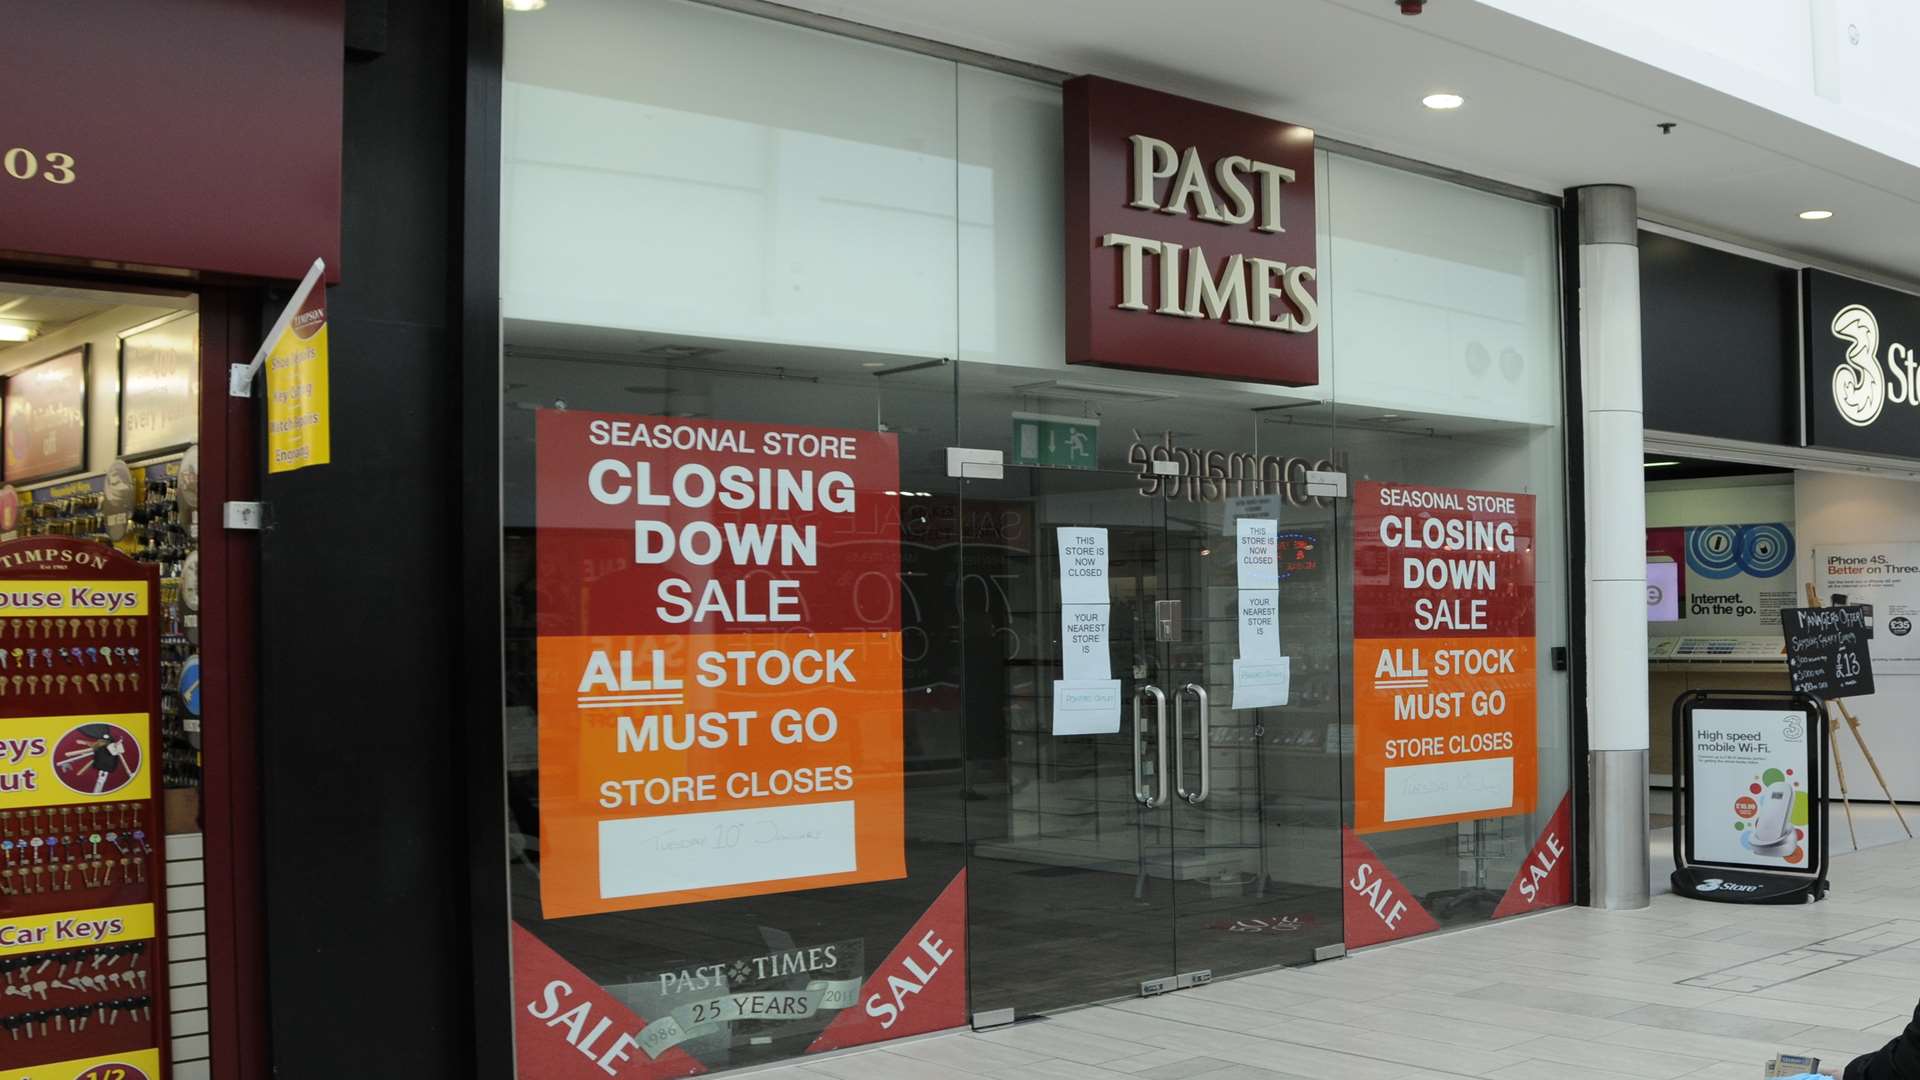 Past Times in County Square, Ashford stopped trading back in 2012